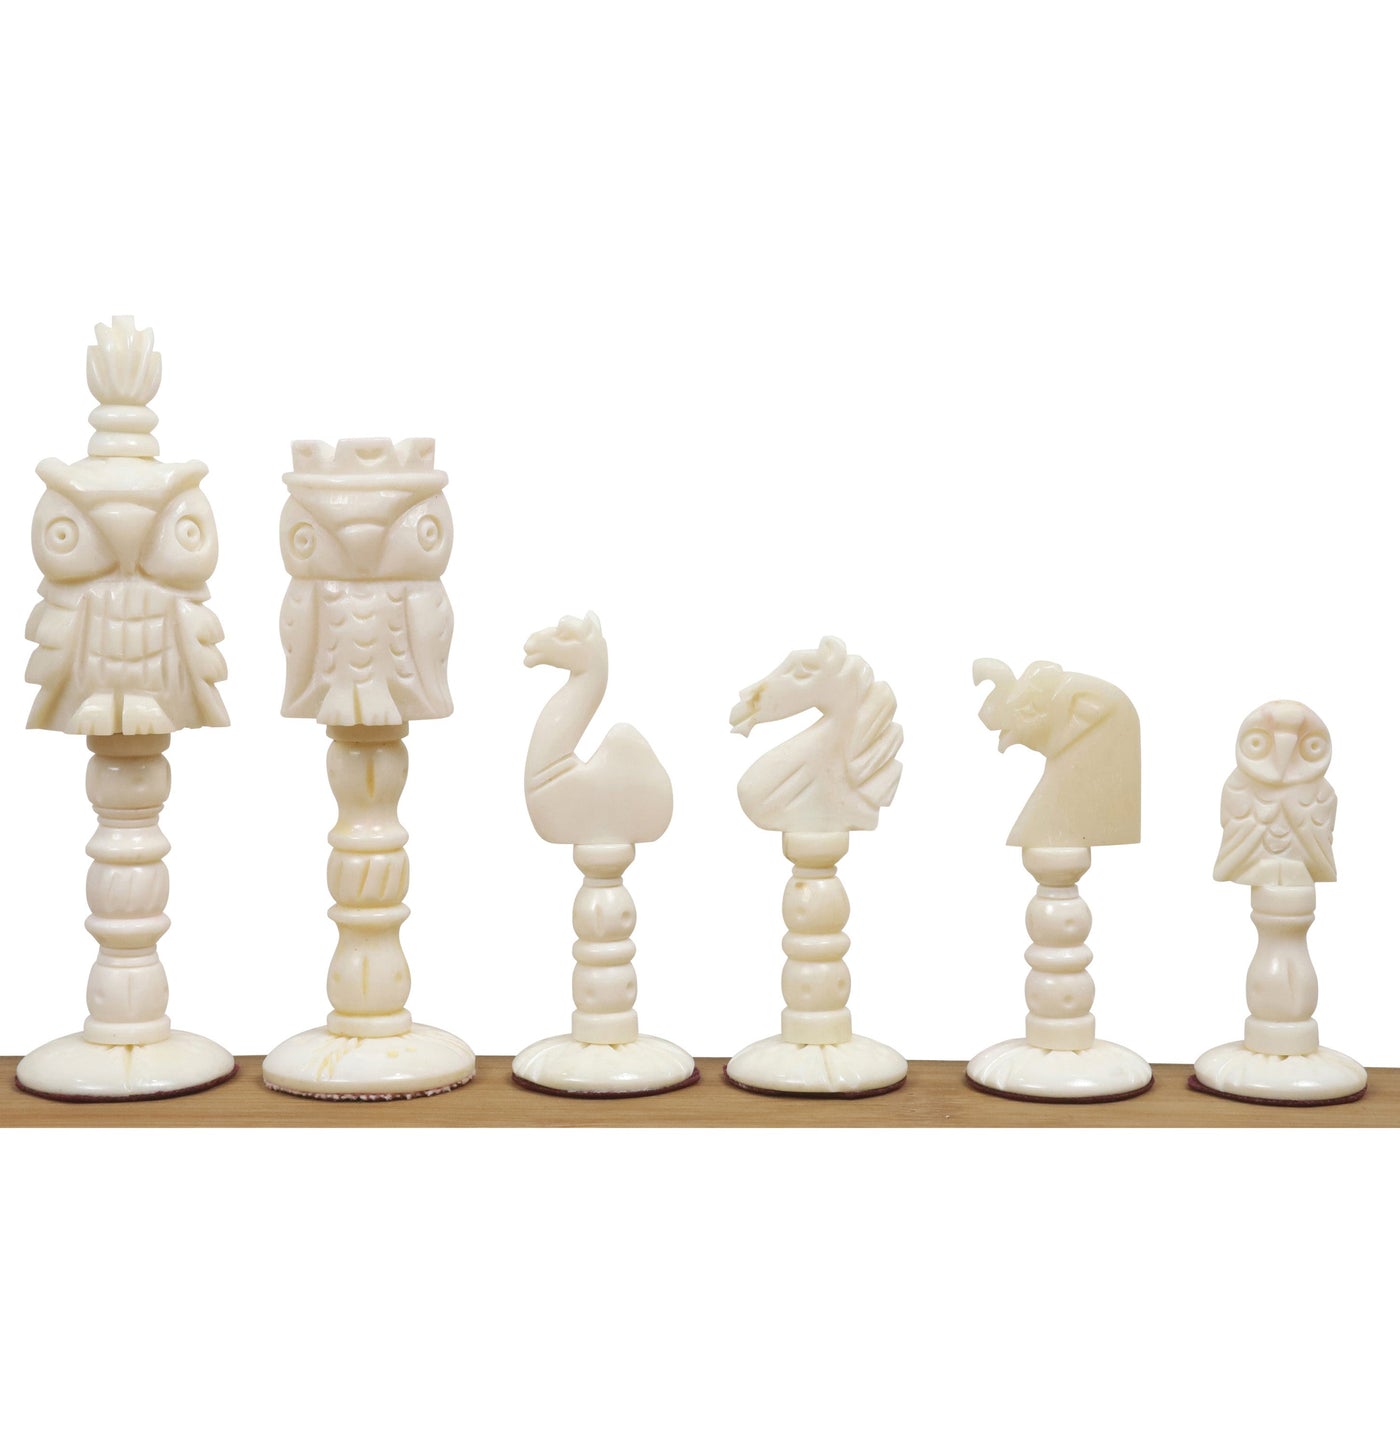 Animal Kingdom Series Chess Pieces Only Set